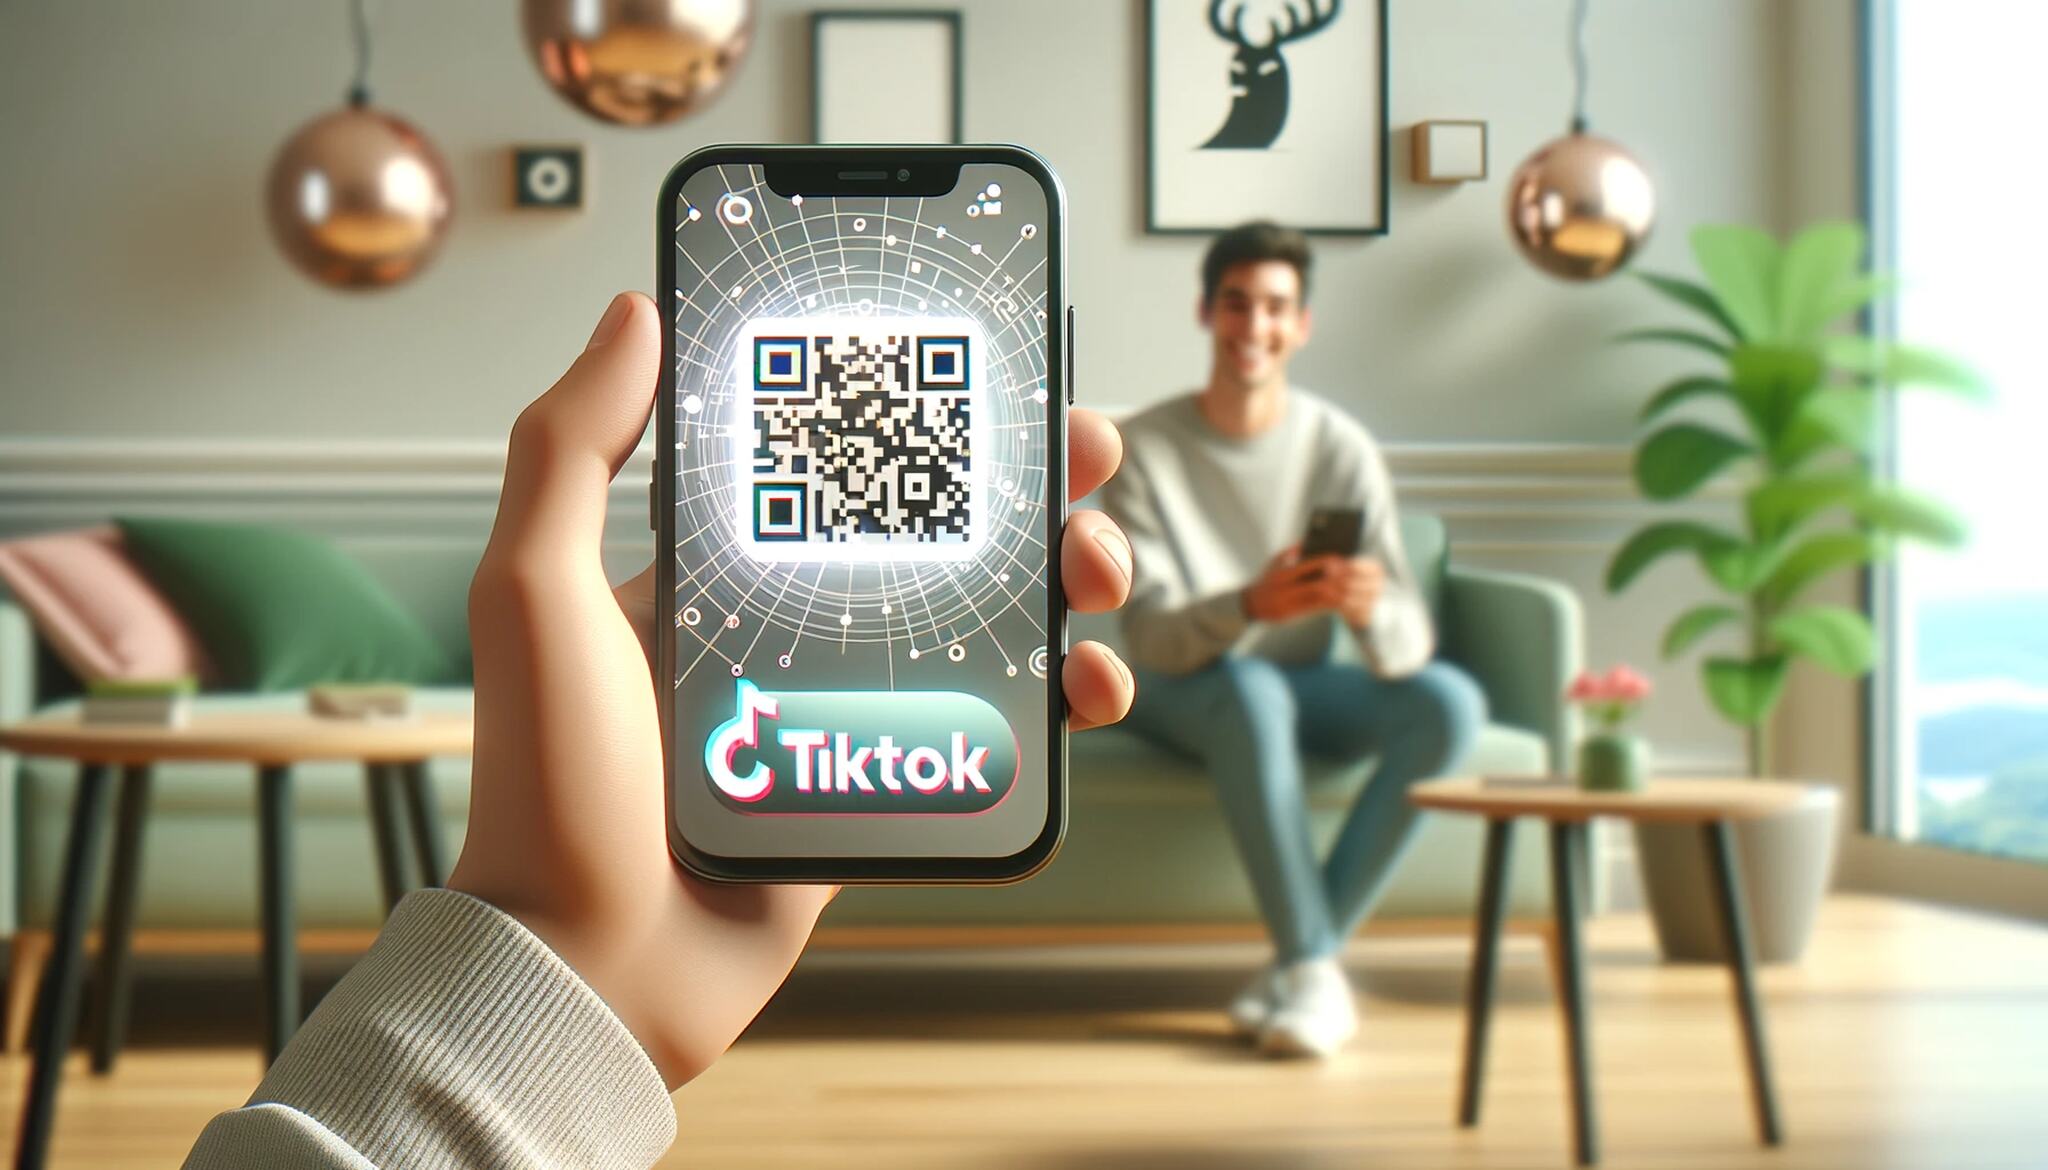 modern smartphone displaying the TikTok app with a QR code on the screen